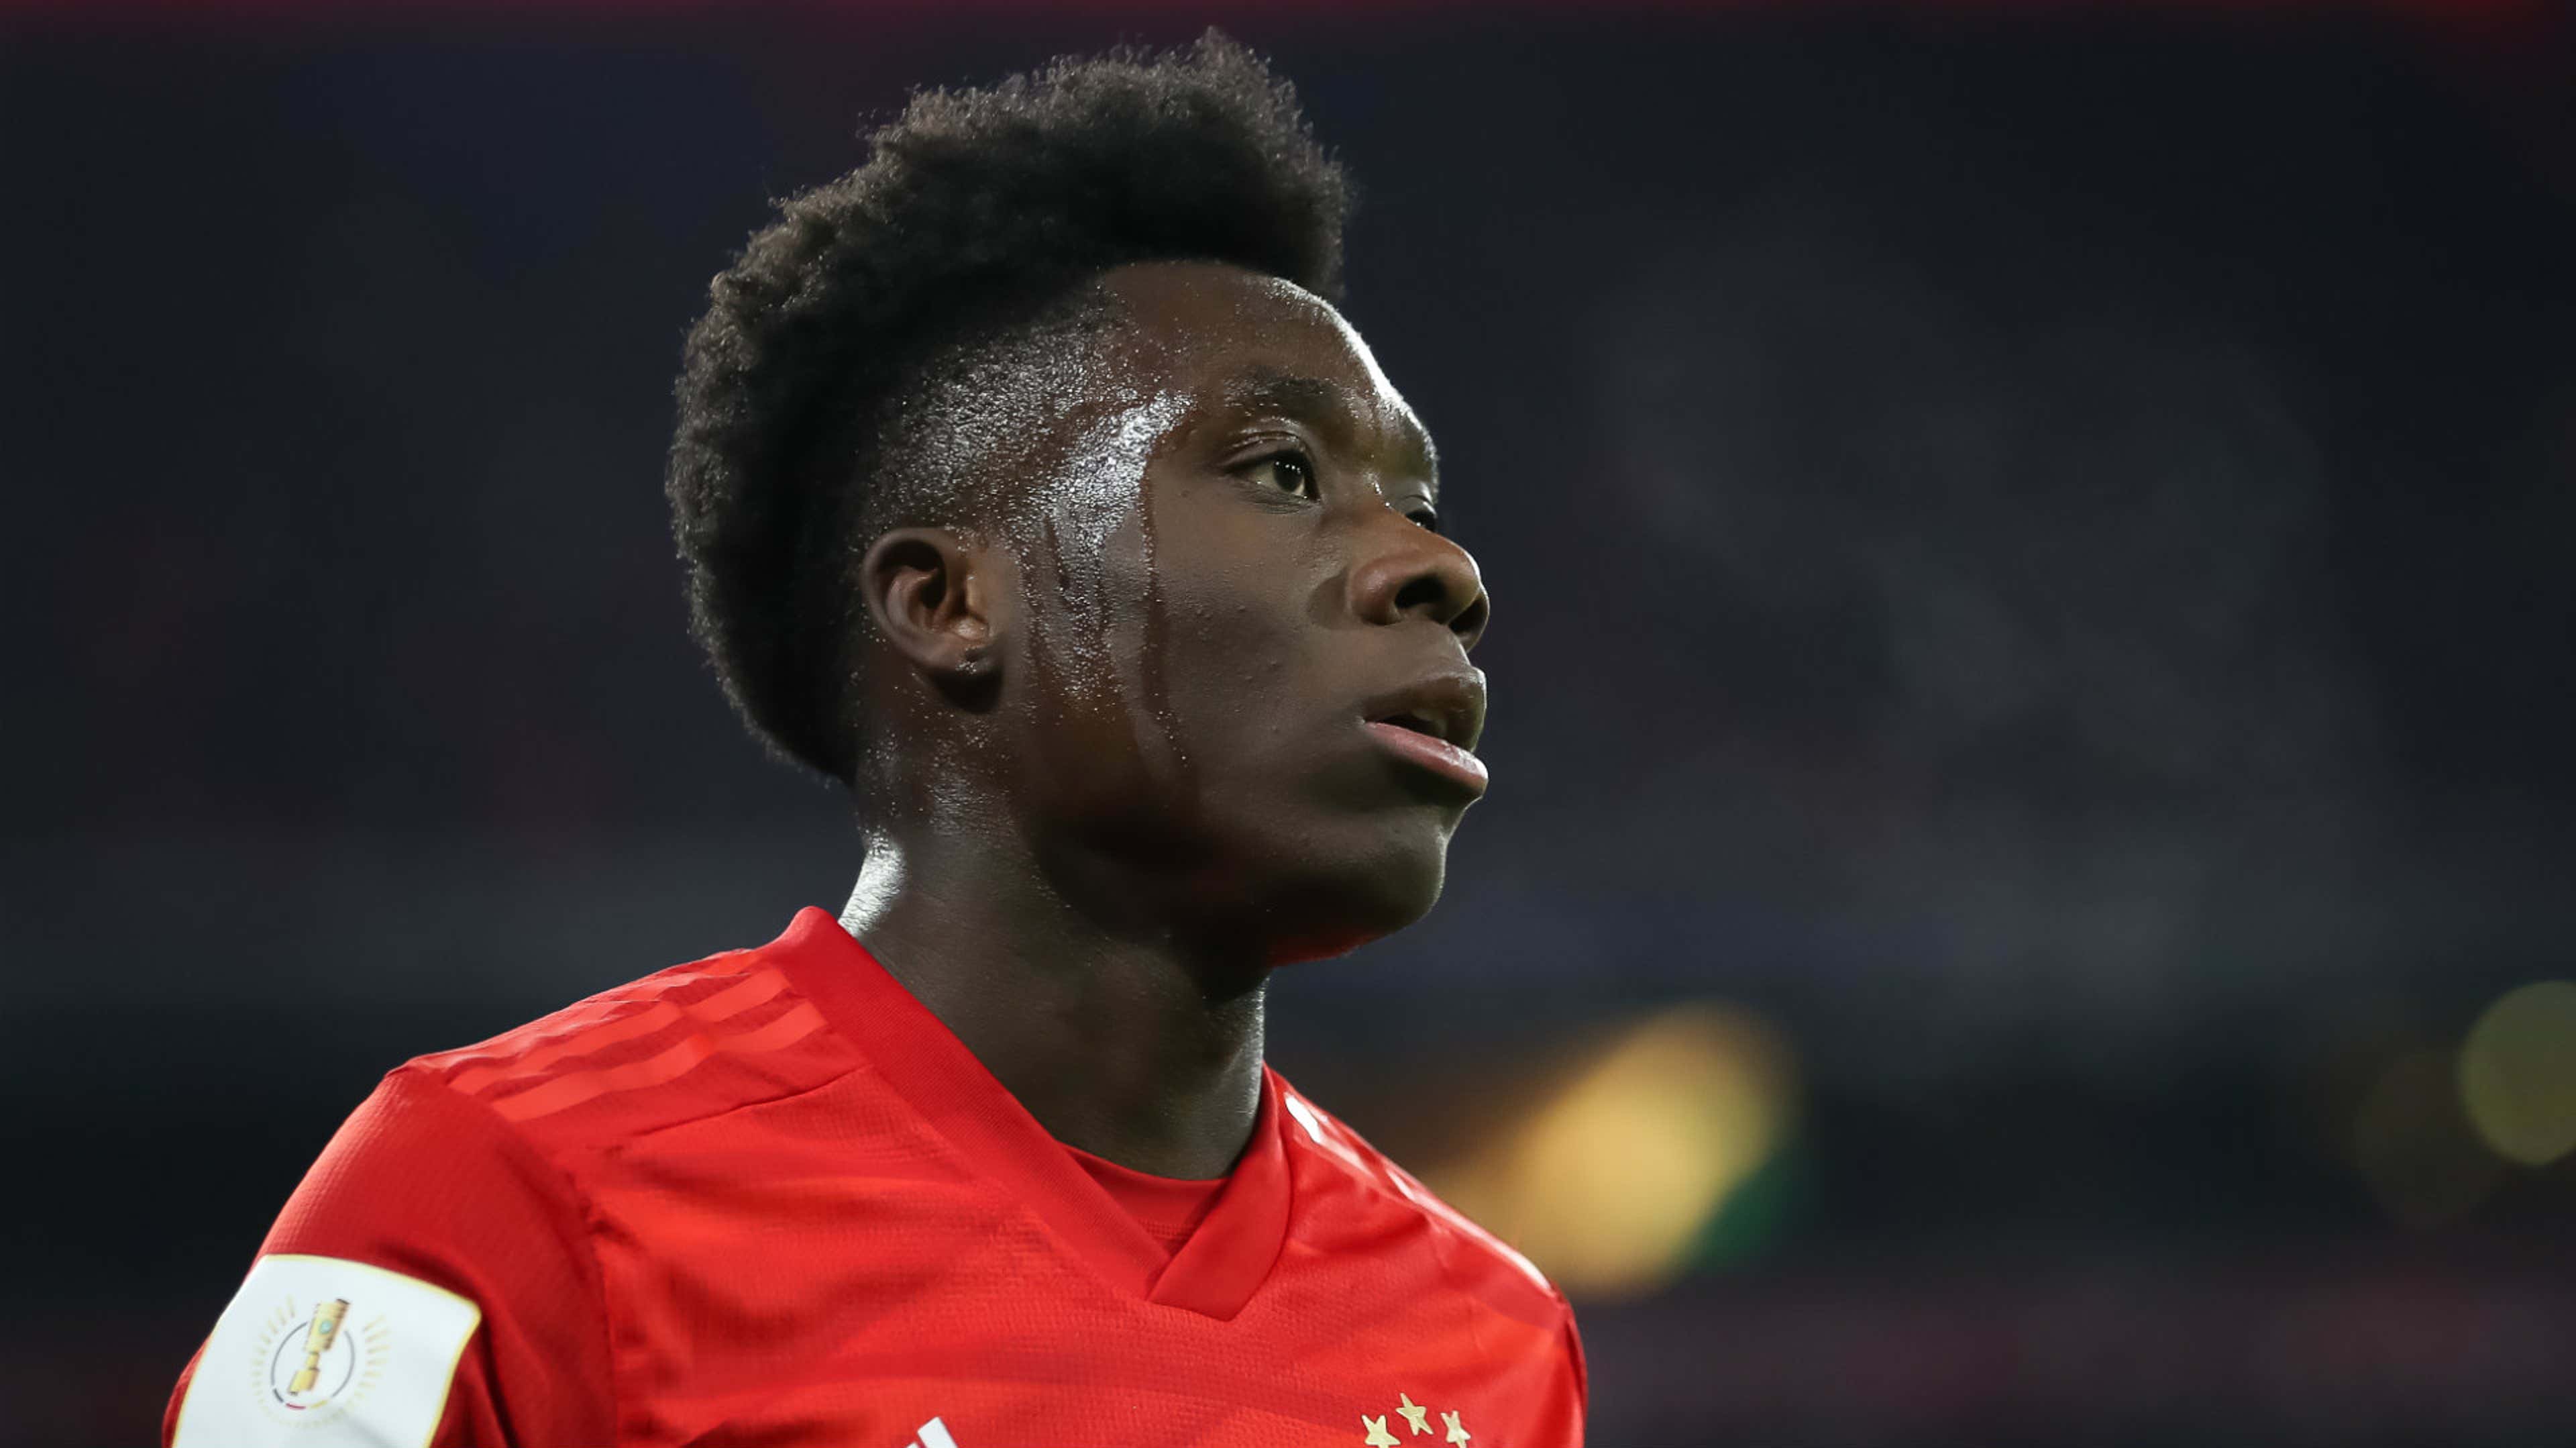 Canadian Alphonso Davies dazzles in final game for Whitecaps - The